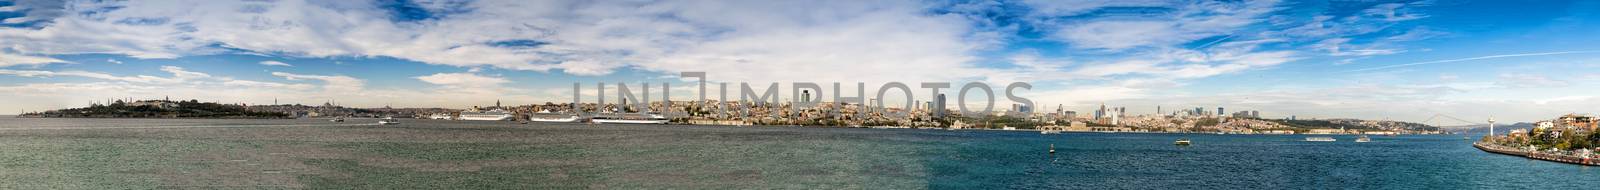 Complete panoramic view of Istanbul from Maiden's Tower by jovannig